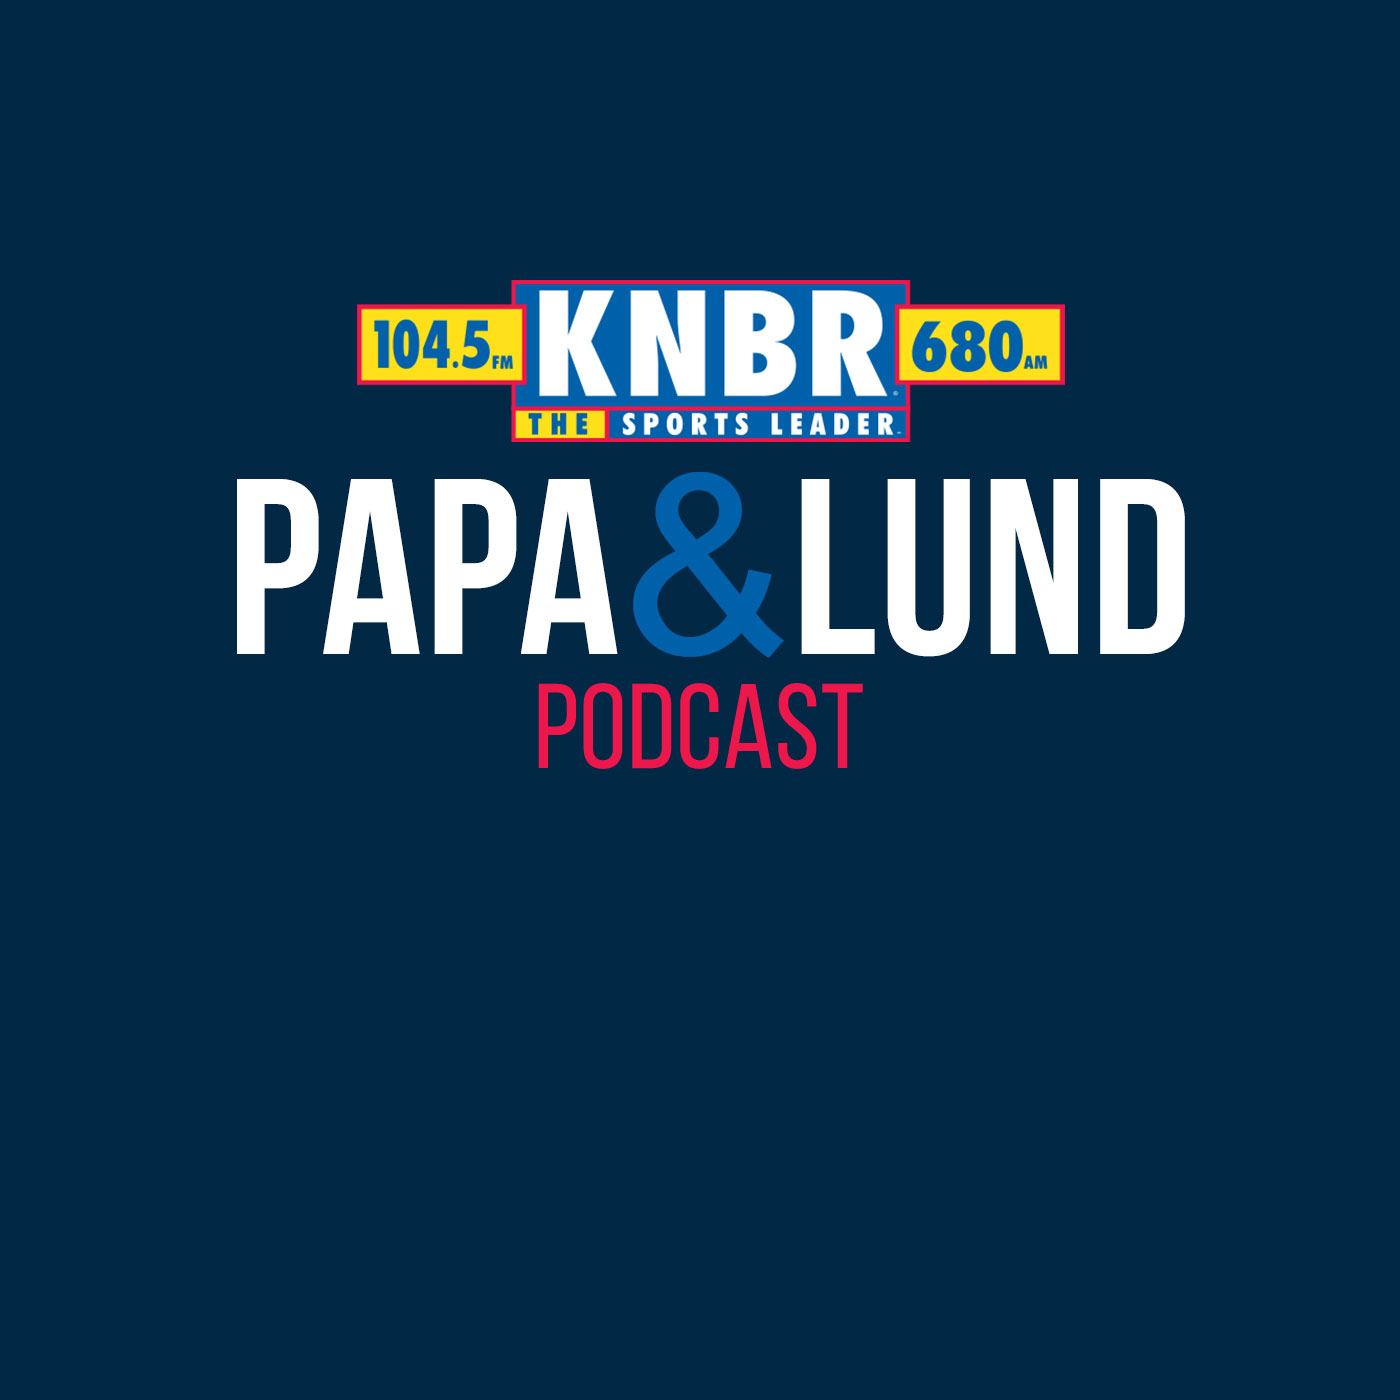 3-1 Papa & Lund Show - Hour 1 - Papa & Lund discuss the success of the Warriors, development of Kuminga as well as react to Crawford's comments about the Giants not wanting him back on the team